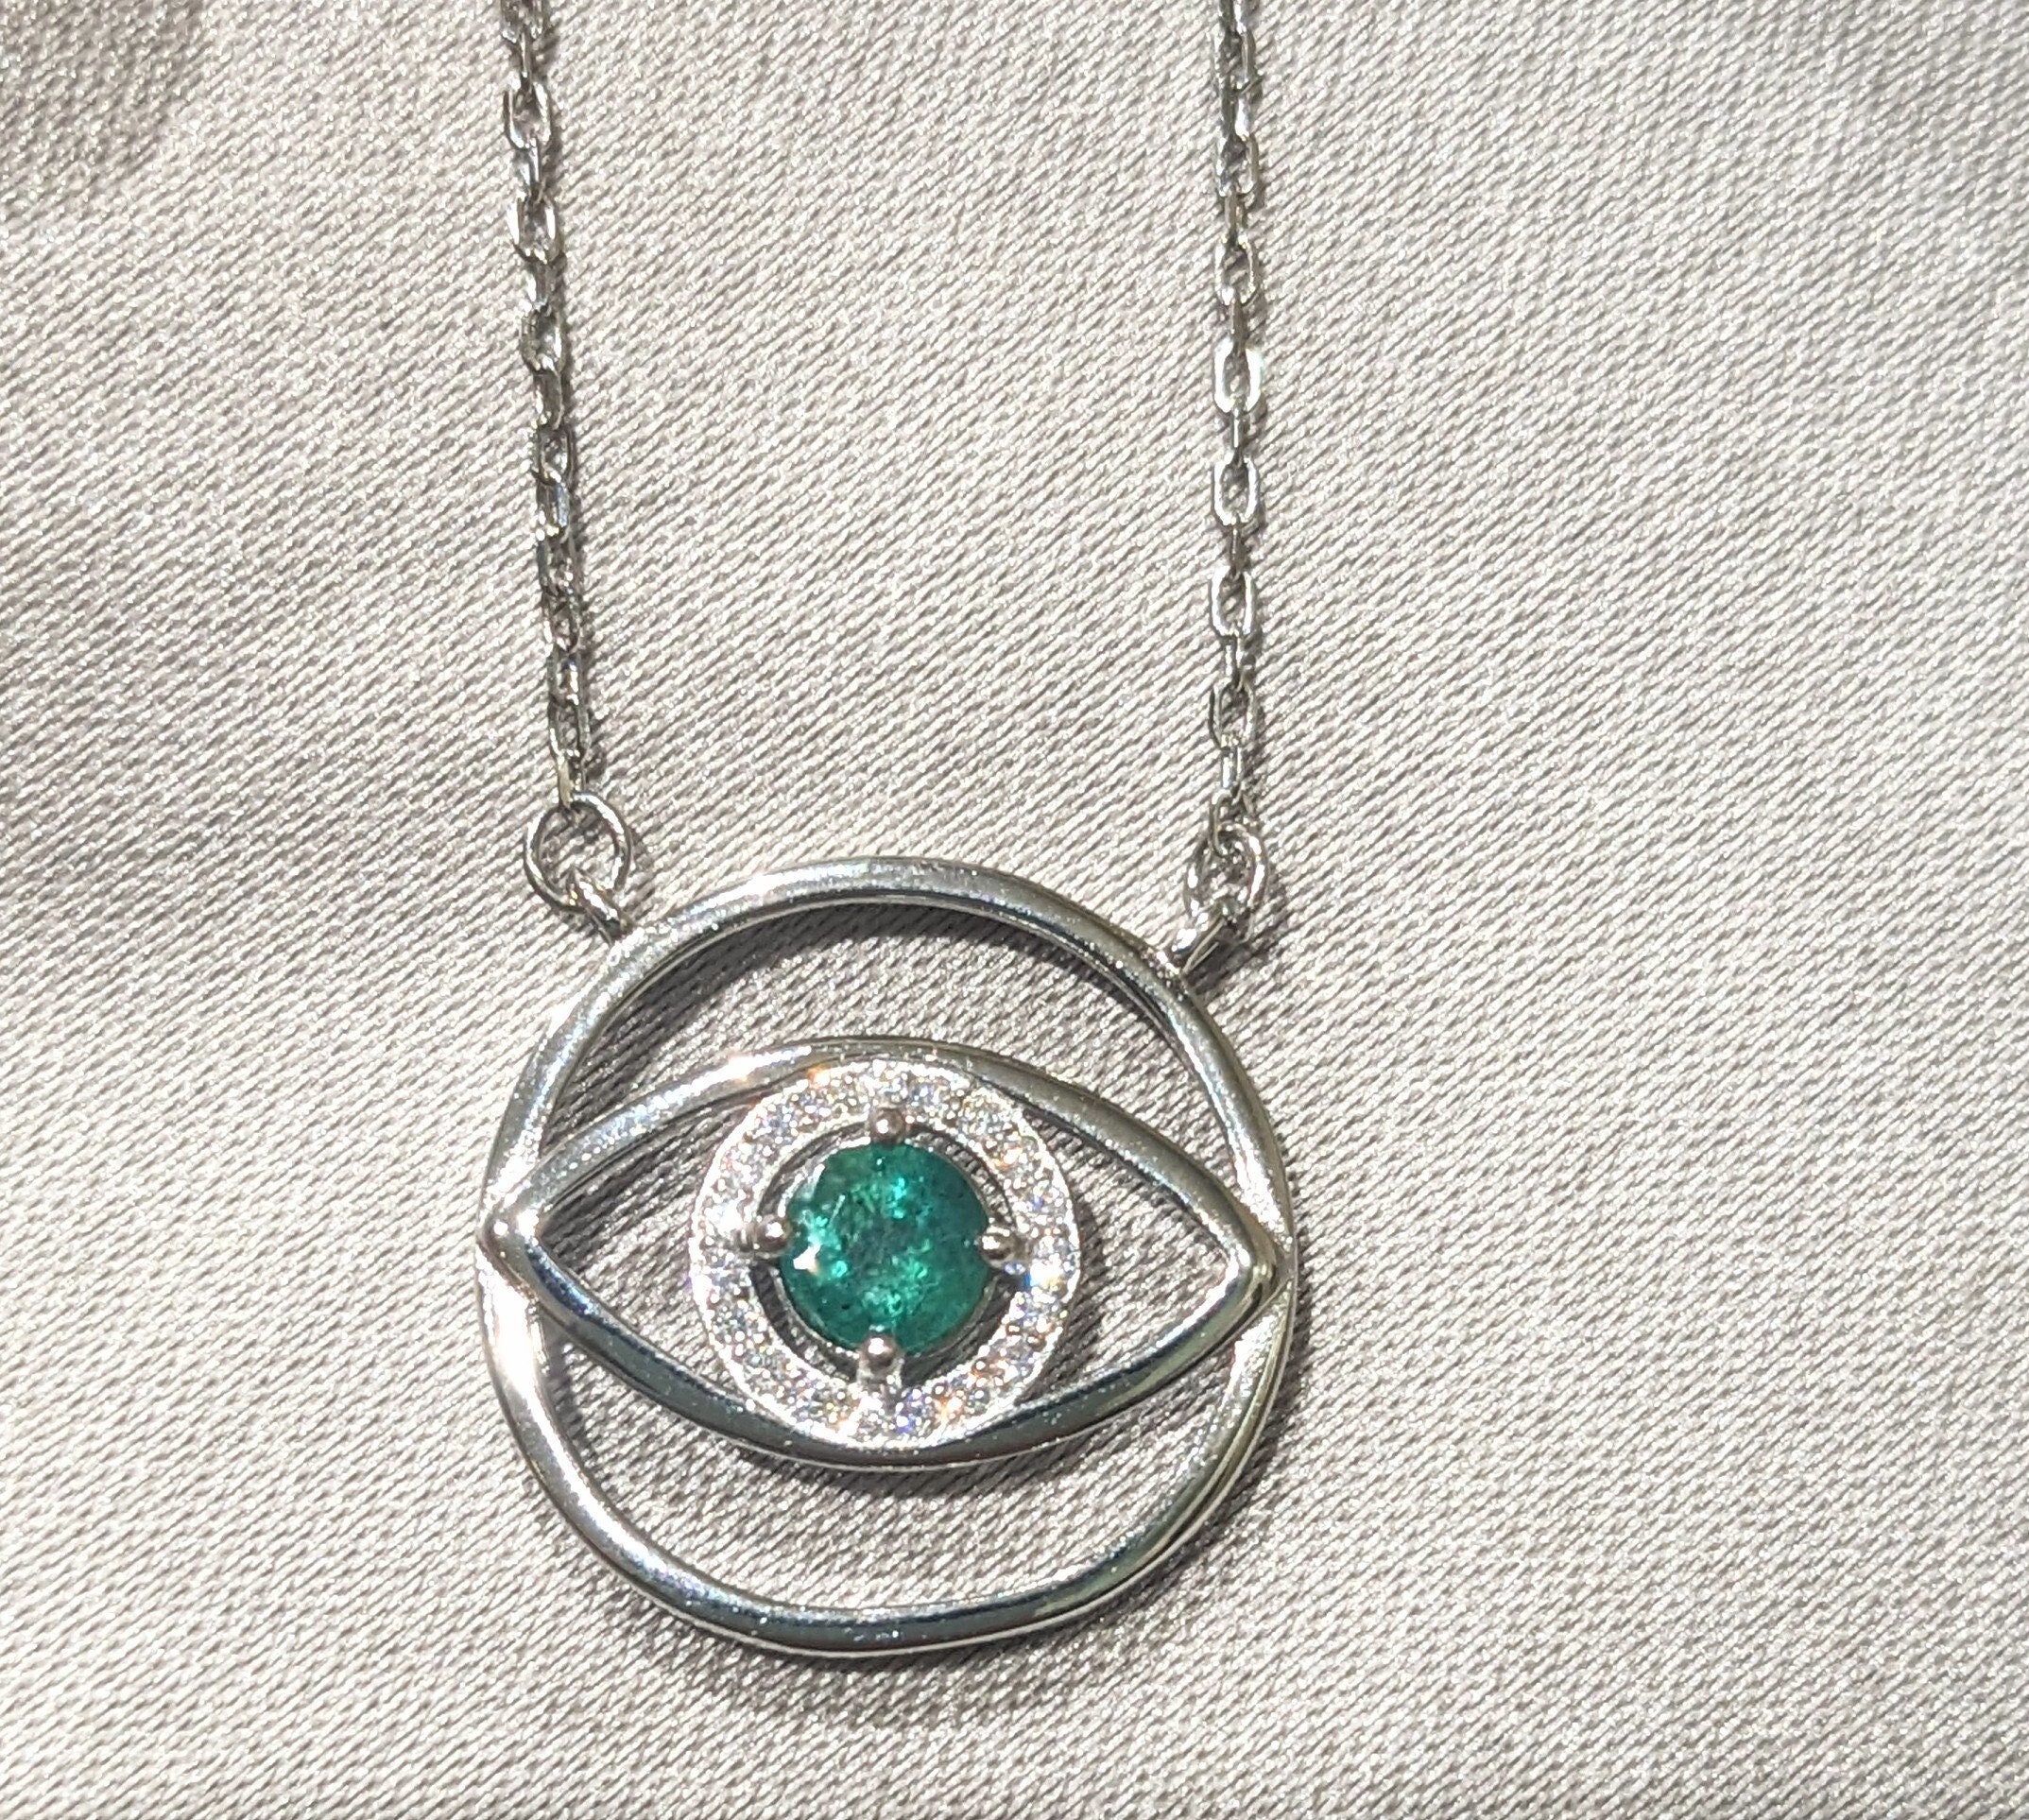 Cleo Necklace, Cleopatra Necklet, Gold Chain, Emerald Gem Stone, Stacking  Necklace, All Seeing Eye Jewellery, Modern Jewellery 